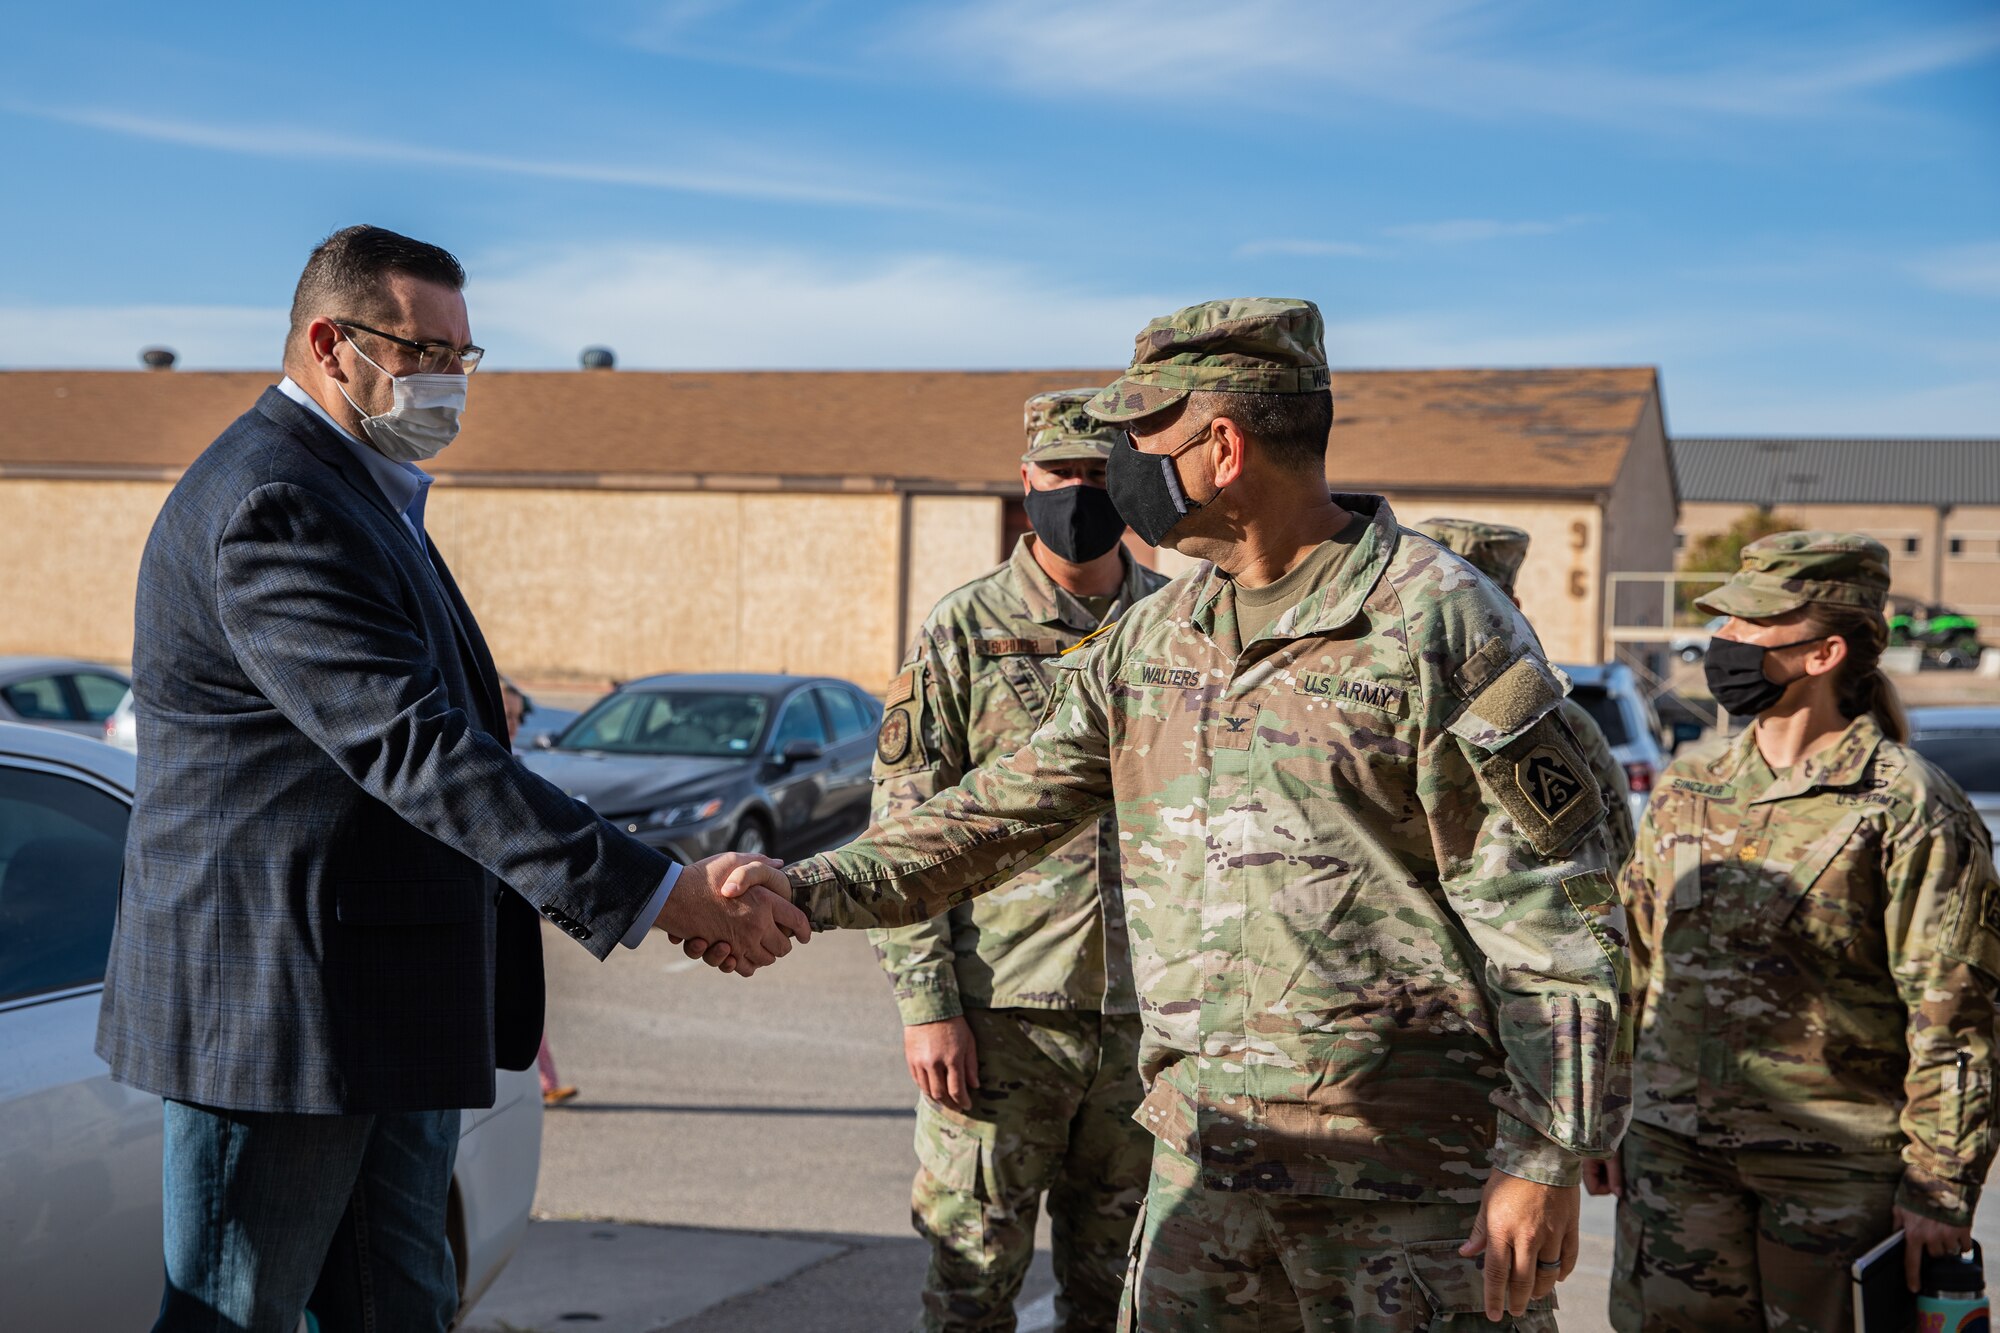 Jeffrey Mayfield, left, Department of Homeland Security deputy federal coordinator, greets U.S. Army Col. Anthony T. Walters, U.S. Army North, during a visit to Holloman Air Force Base, New Mexico, Sept. 23, 2021. The Department of Defense, through U.S. Northern Command, and in support of the Department of State and Department of Homeland Security, is providing transportation, temporary housing, medical screening, and general support for at least 50,000 Afghan evacuees at suitable facilities, in permanent or temporary structures, as quickly as possible. This initiative provides Afghan evacuees essential support at secure locations outside Afghanistan. (U.S. Army photo by Pfc. Anthony Sanchez)